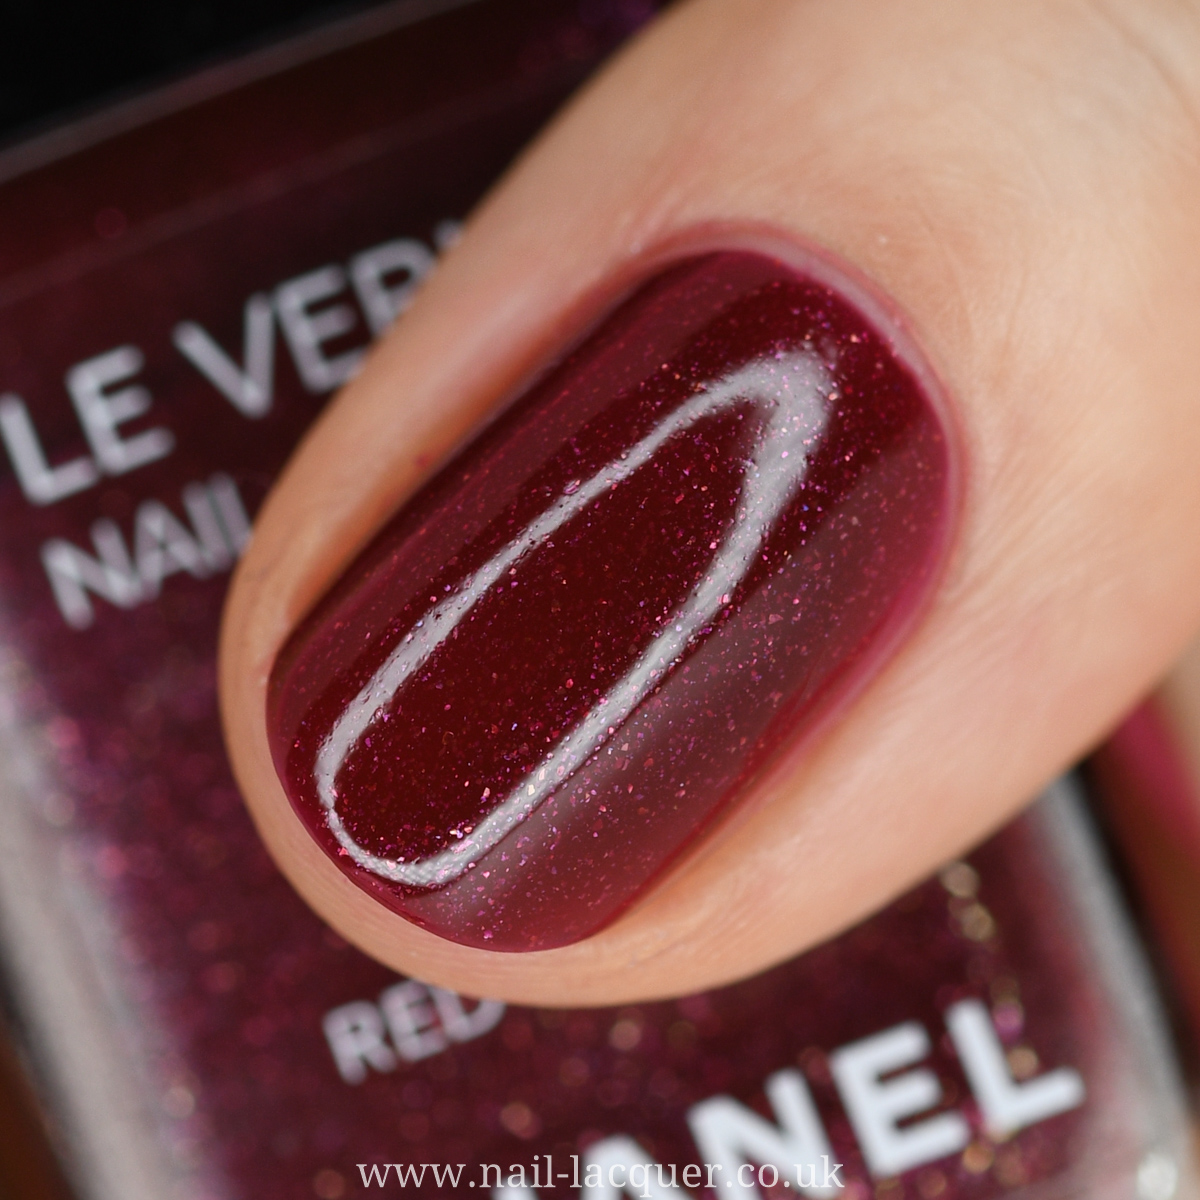 Chanel Red Dream - Nail Lacquer UK